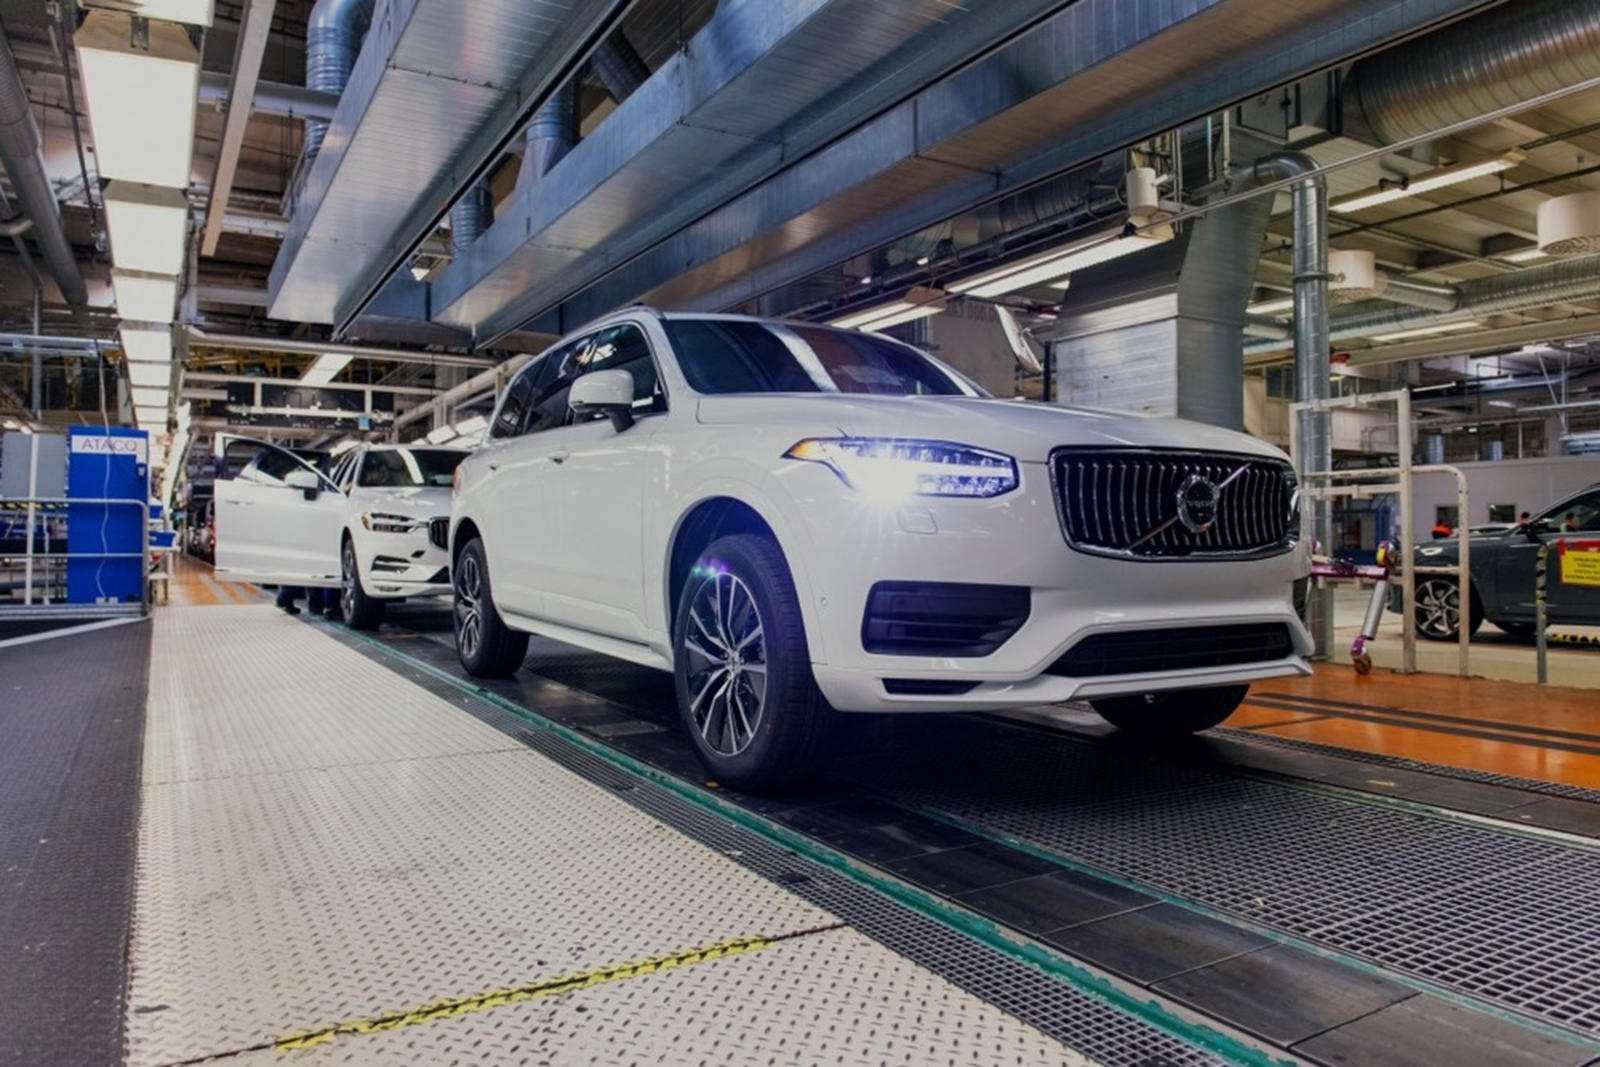 The Self Driving Volvo Is One Step Closer To Hitting The Road | CarBuzz